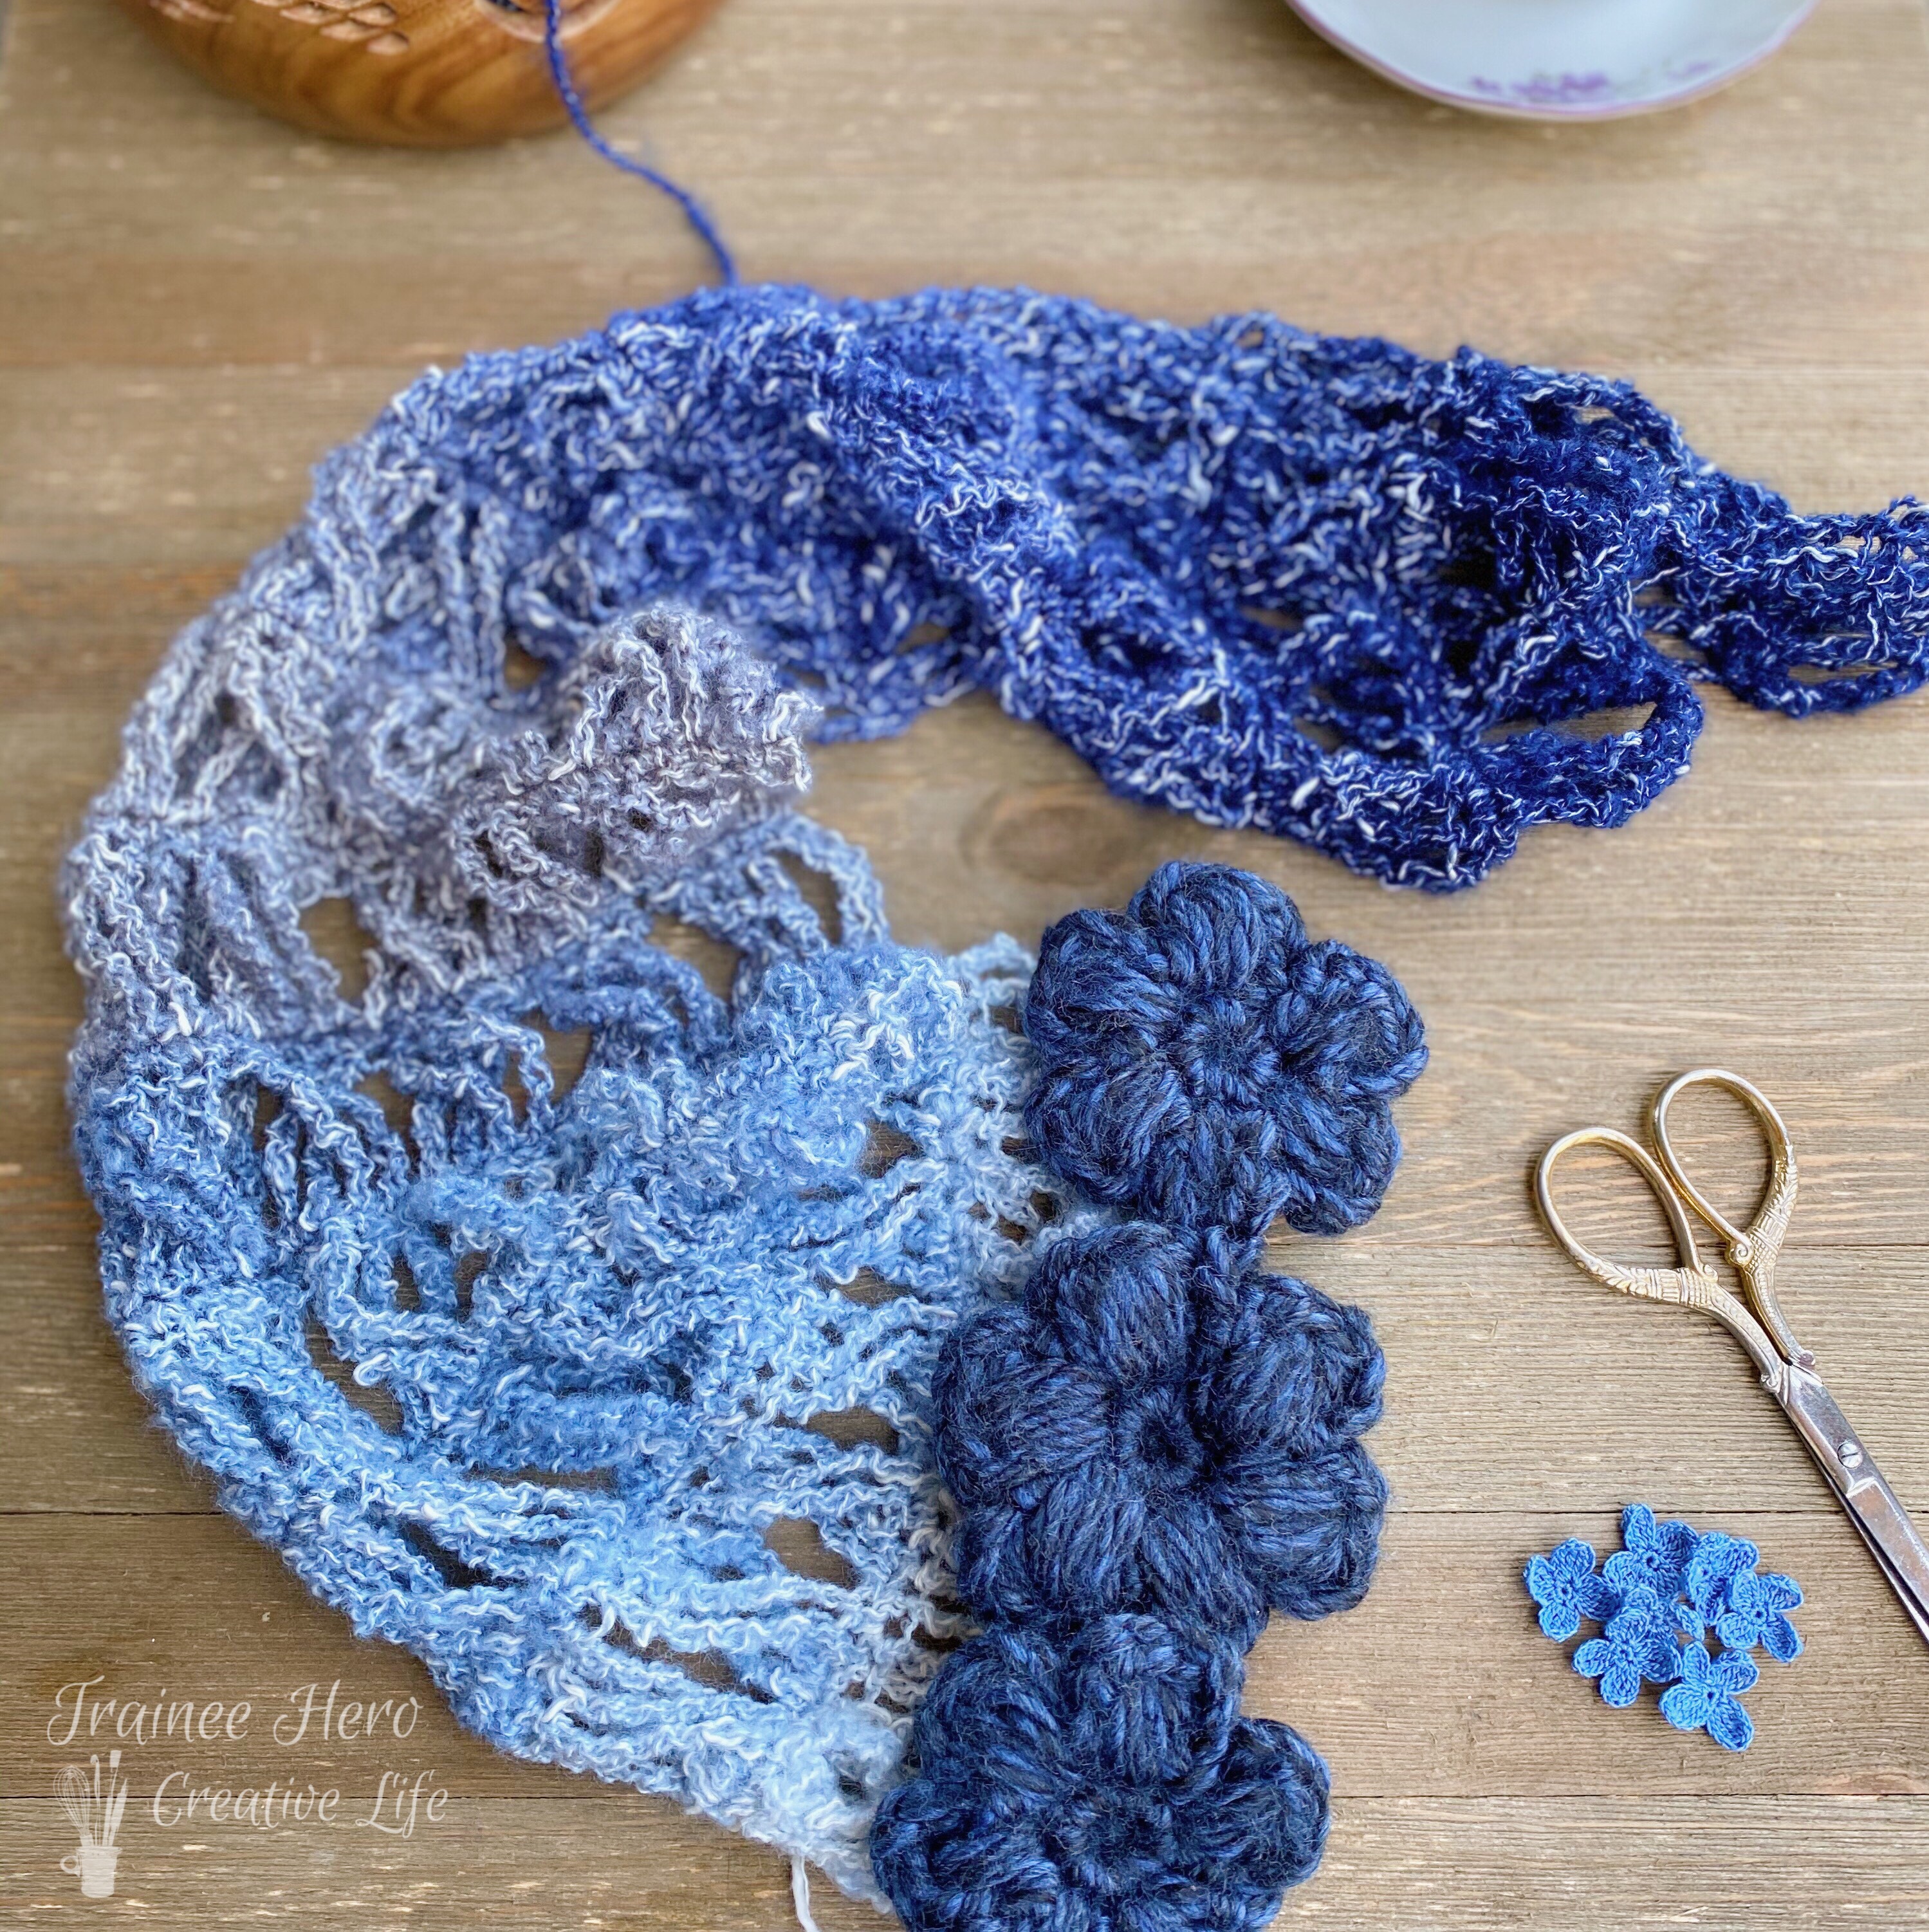 The convertible crochet scarf laid out in a curve with crochet puff stitch flowers